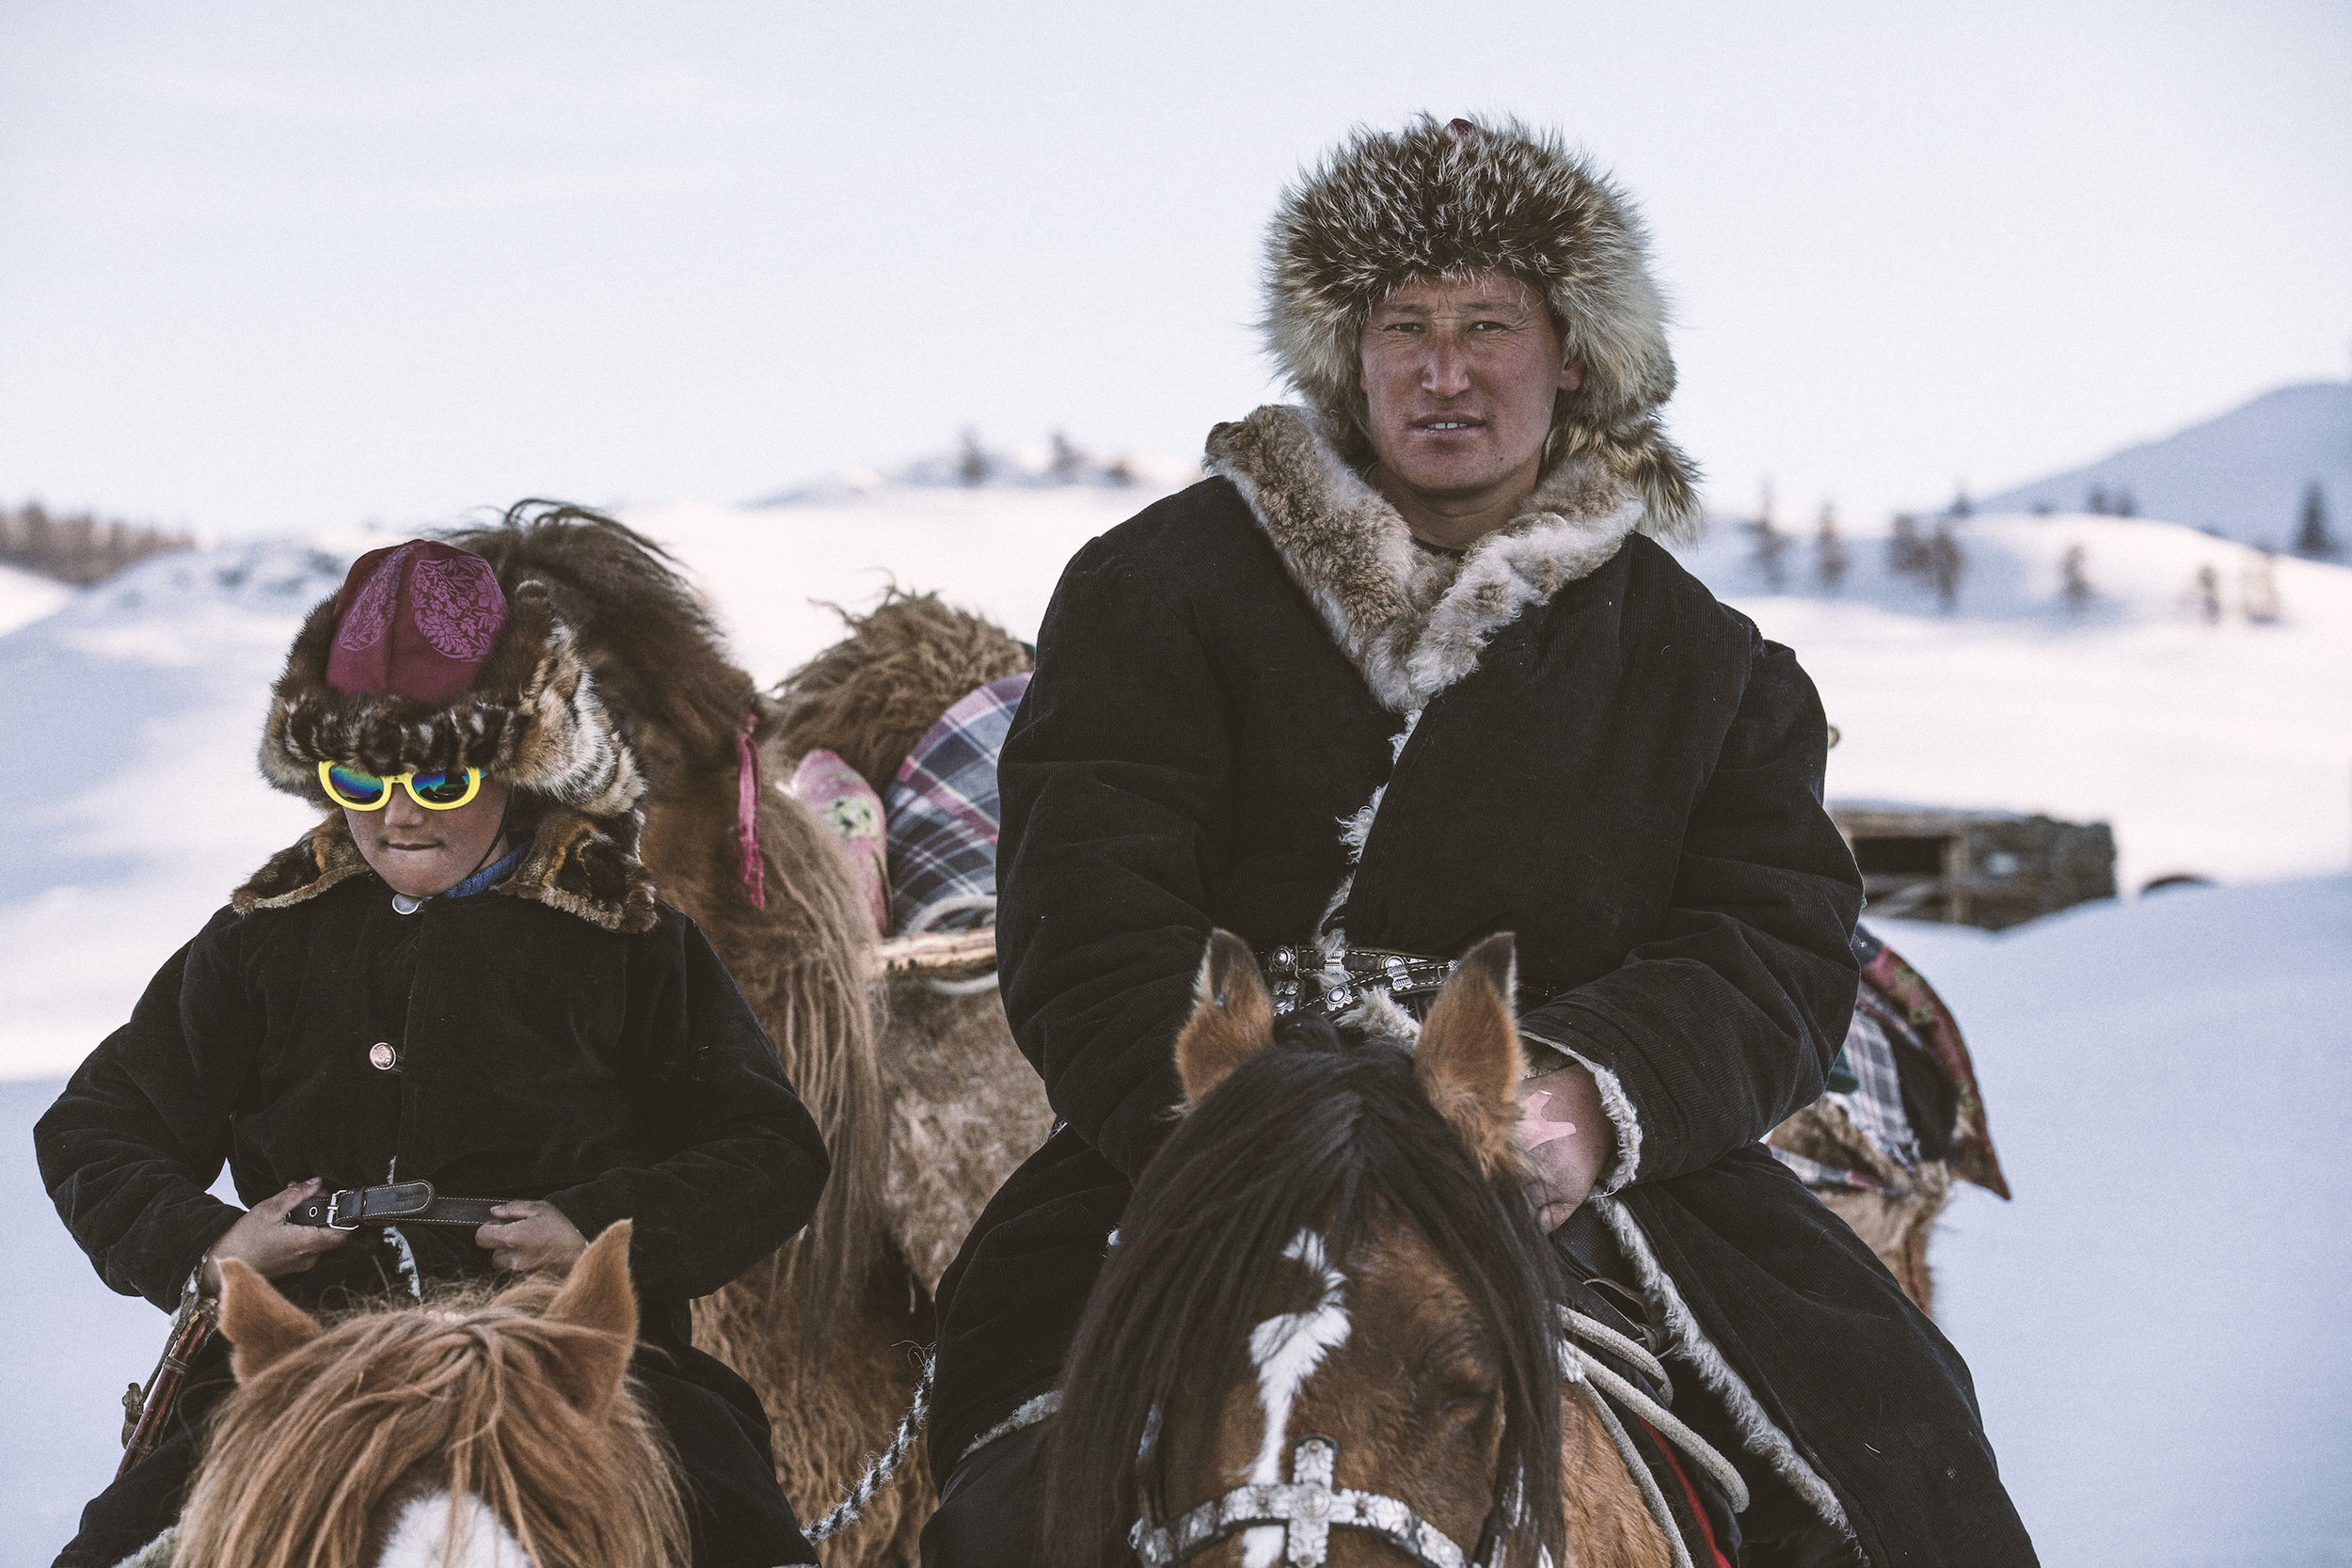 Janibek (L) with his father Auez on the winter migration, Mongolia Altai_BOY_NOMAD_aAron_Munson.jpg